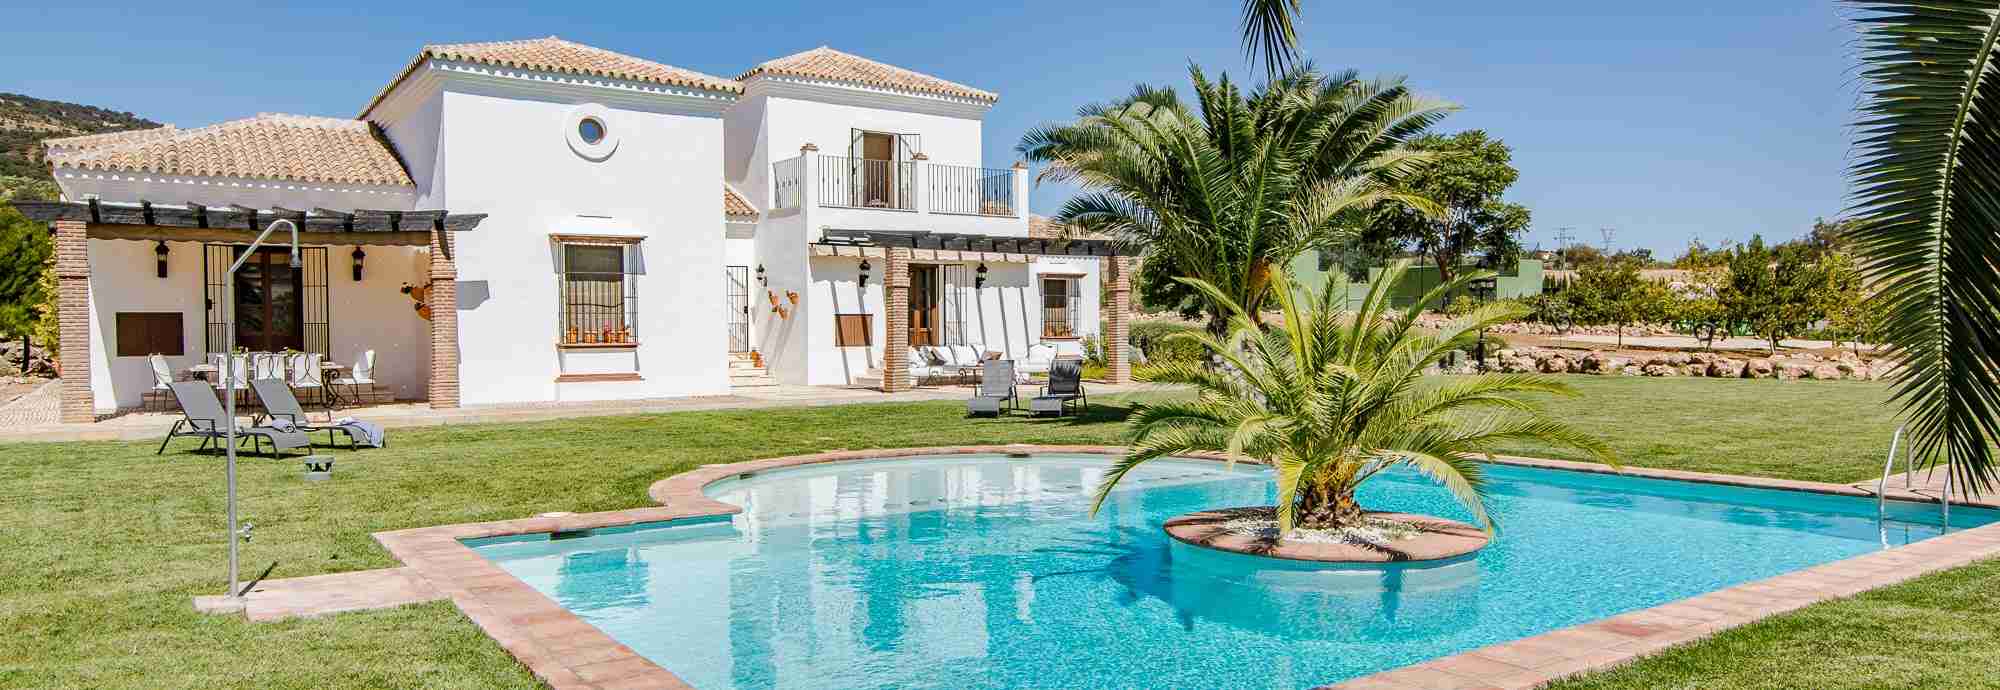 Luxury family villa with lawned gardens and large pool close to Ronda town